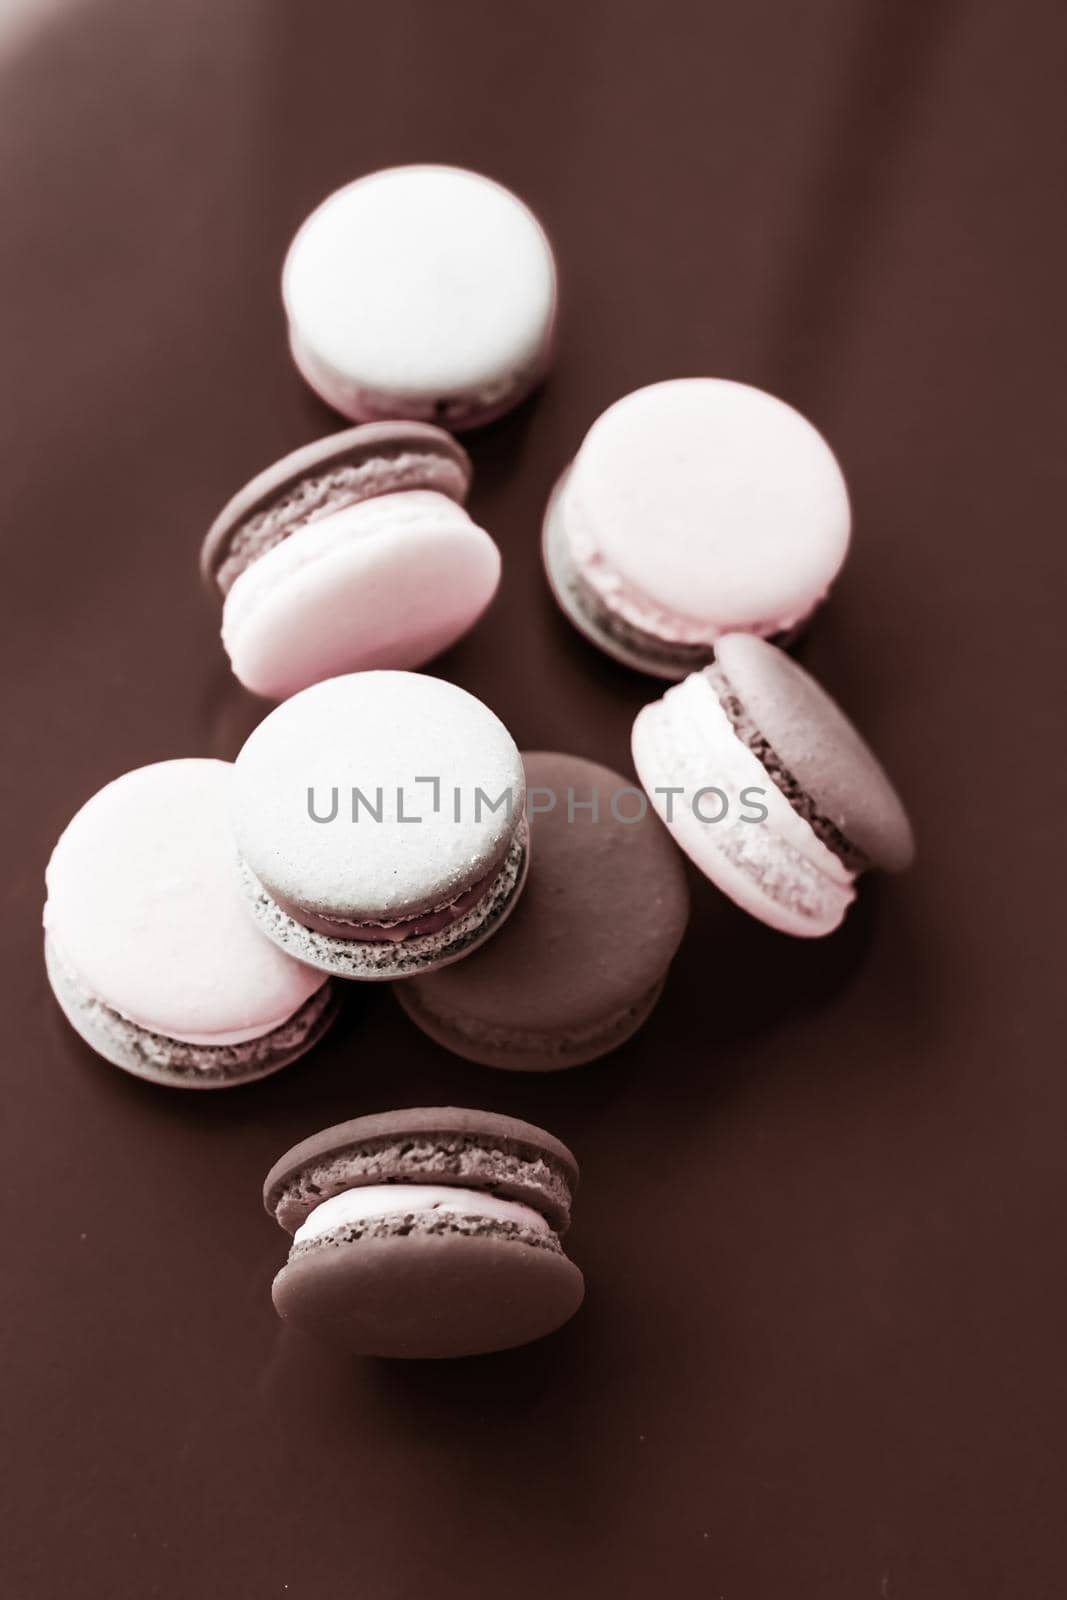 Pastry, bakery and branding concept - French macaroons on milk chocolate background, parisian chic cafe dessert, sweet food and cake macaron for luxury confectionery brand, holiday backdrop design